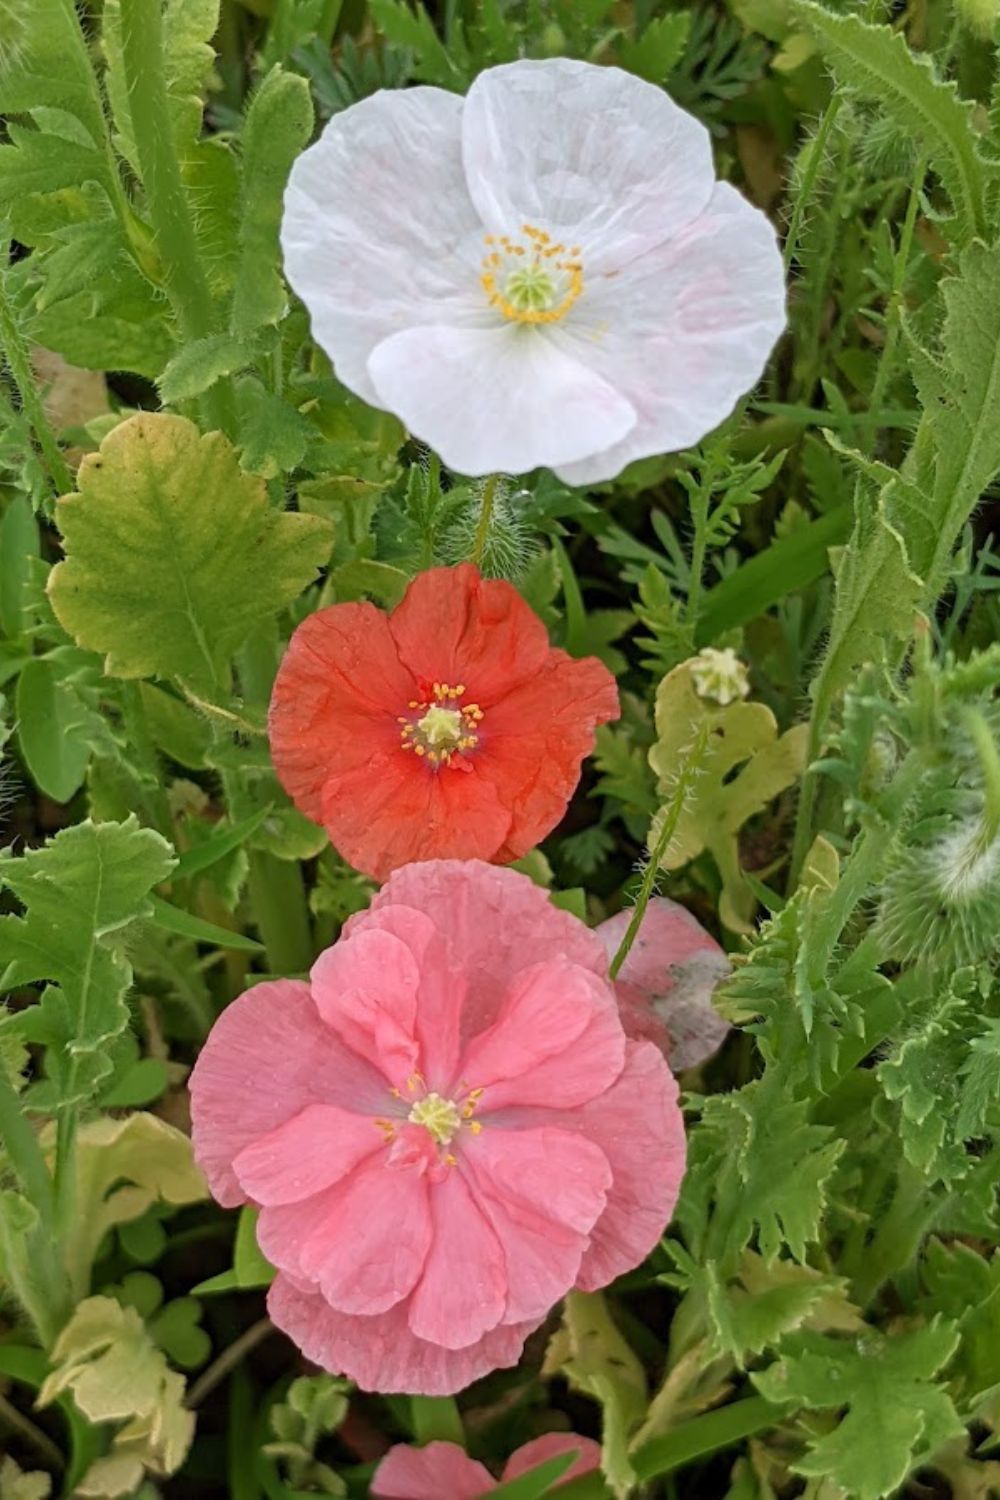 3 poppies in different colors: white, orange and pink